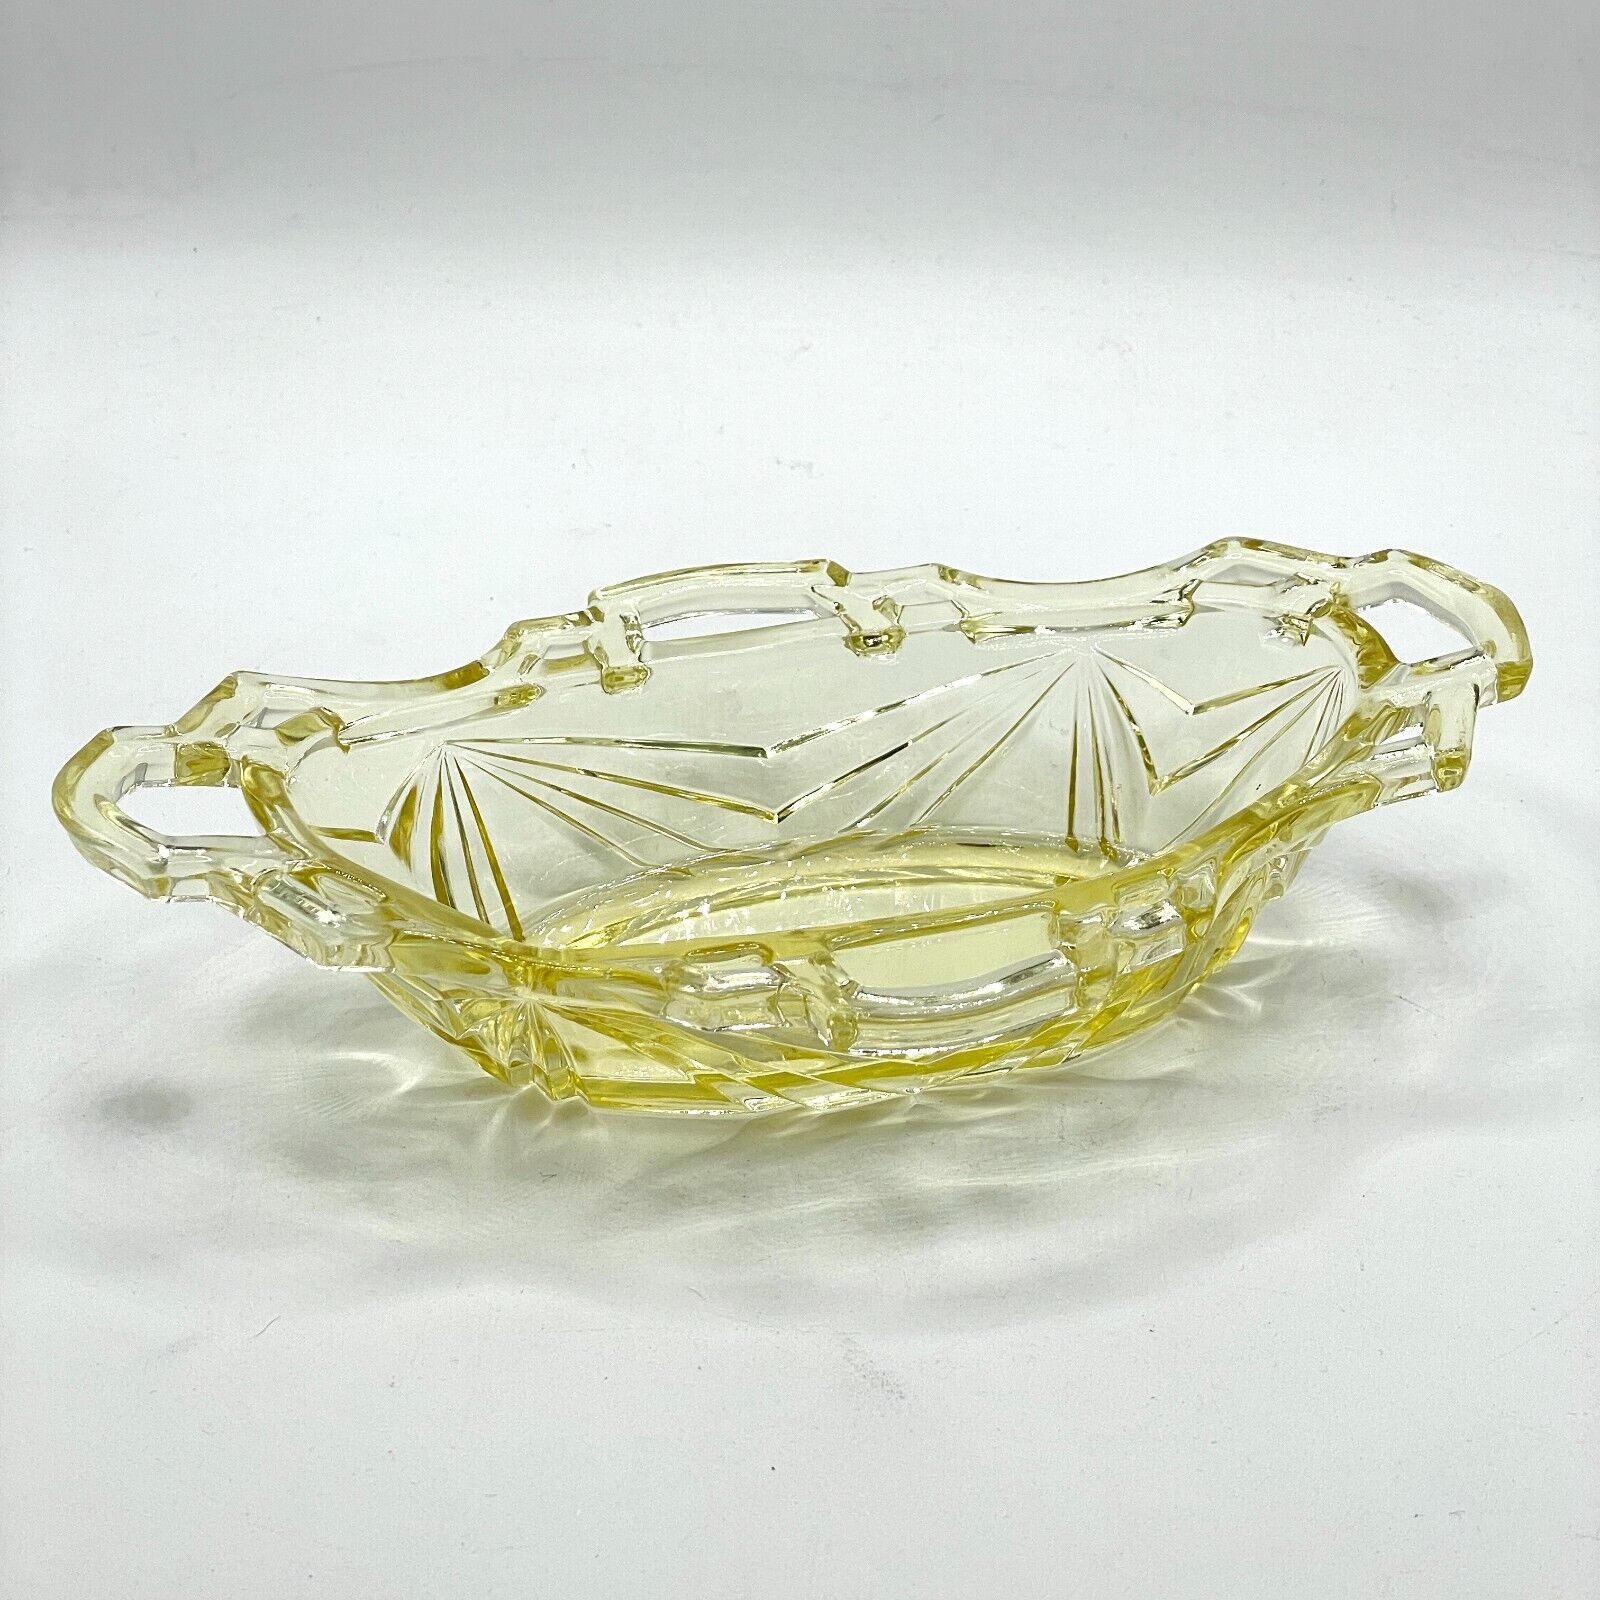 Yellow Vintage Depression Glass Relish Oval Serving Dish